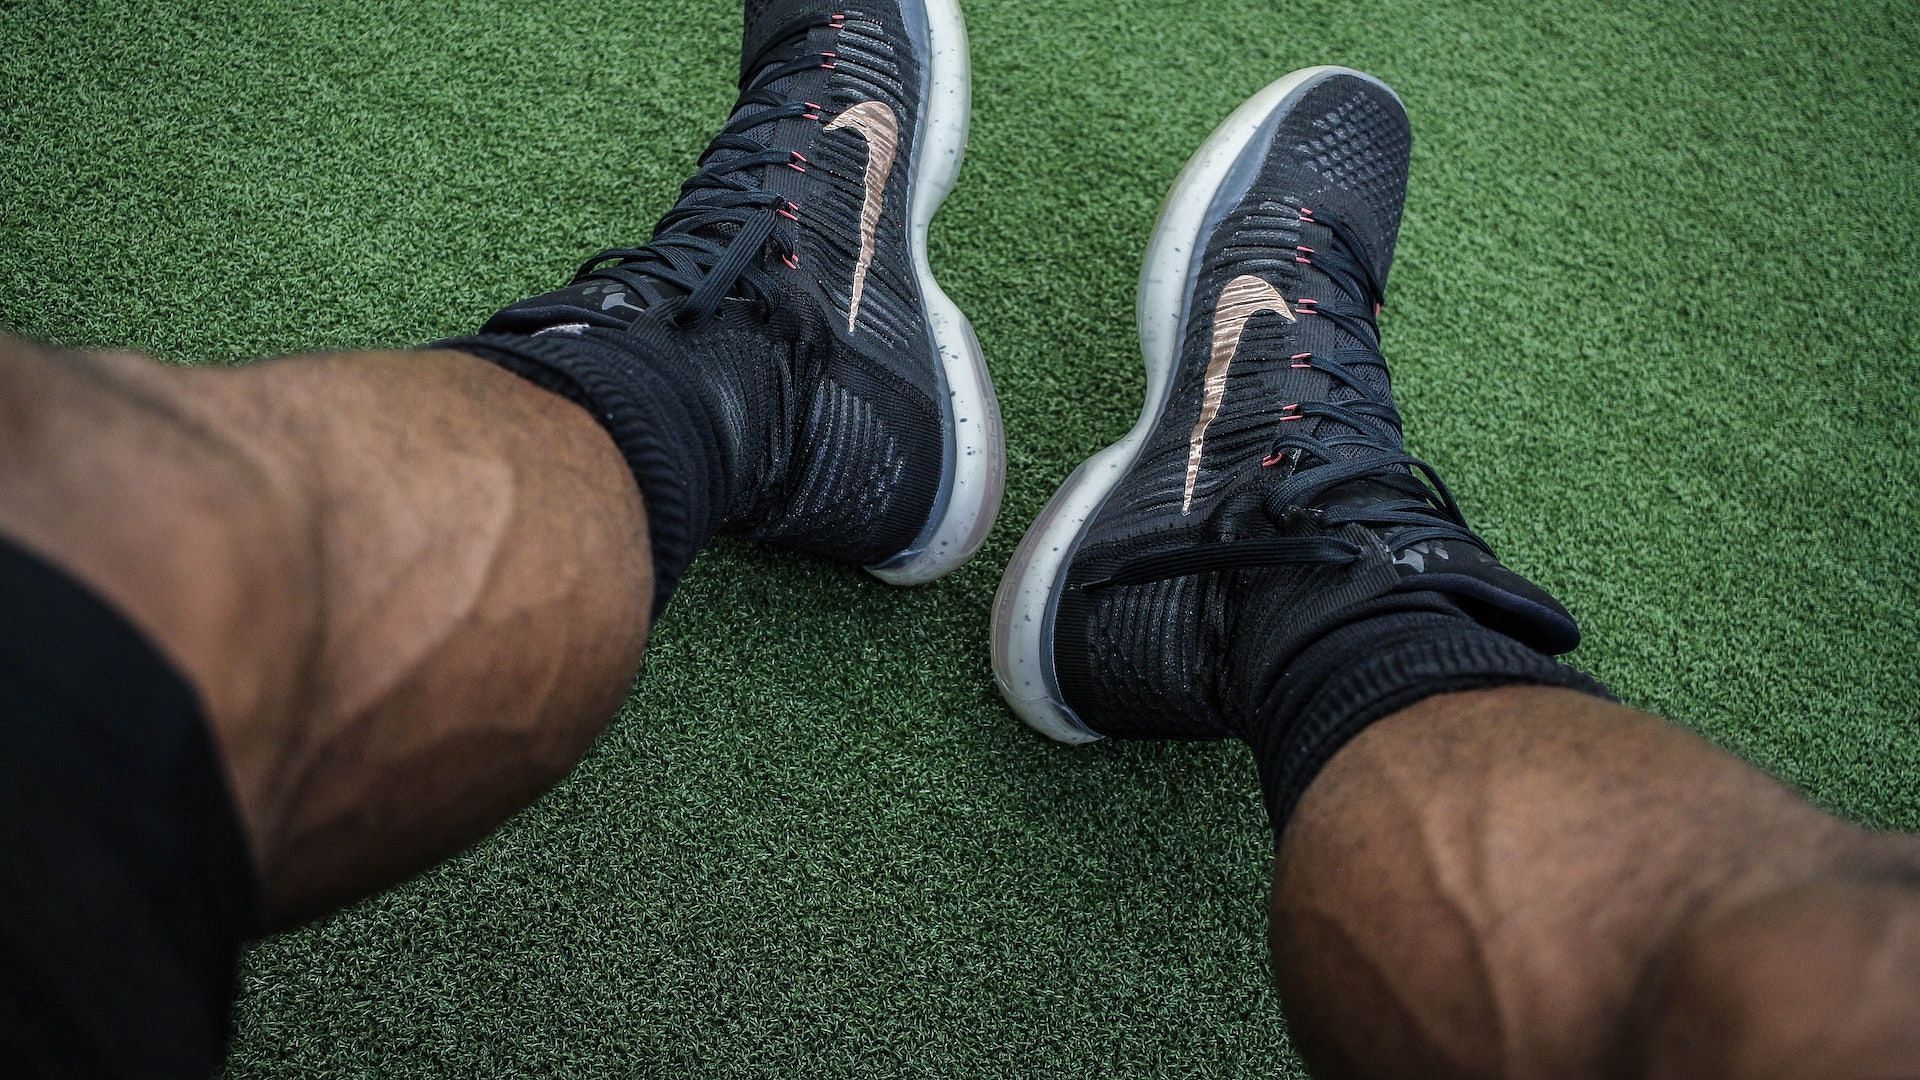 The best exercises for your calf muscles. Image via Unsplash/Yamon Figurs